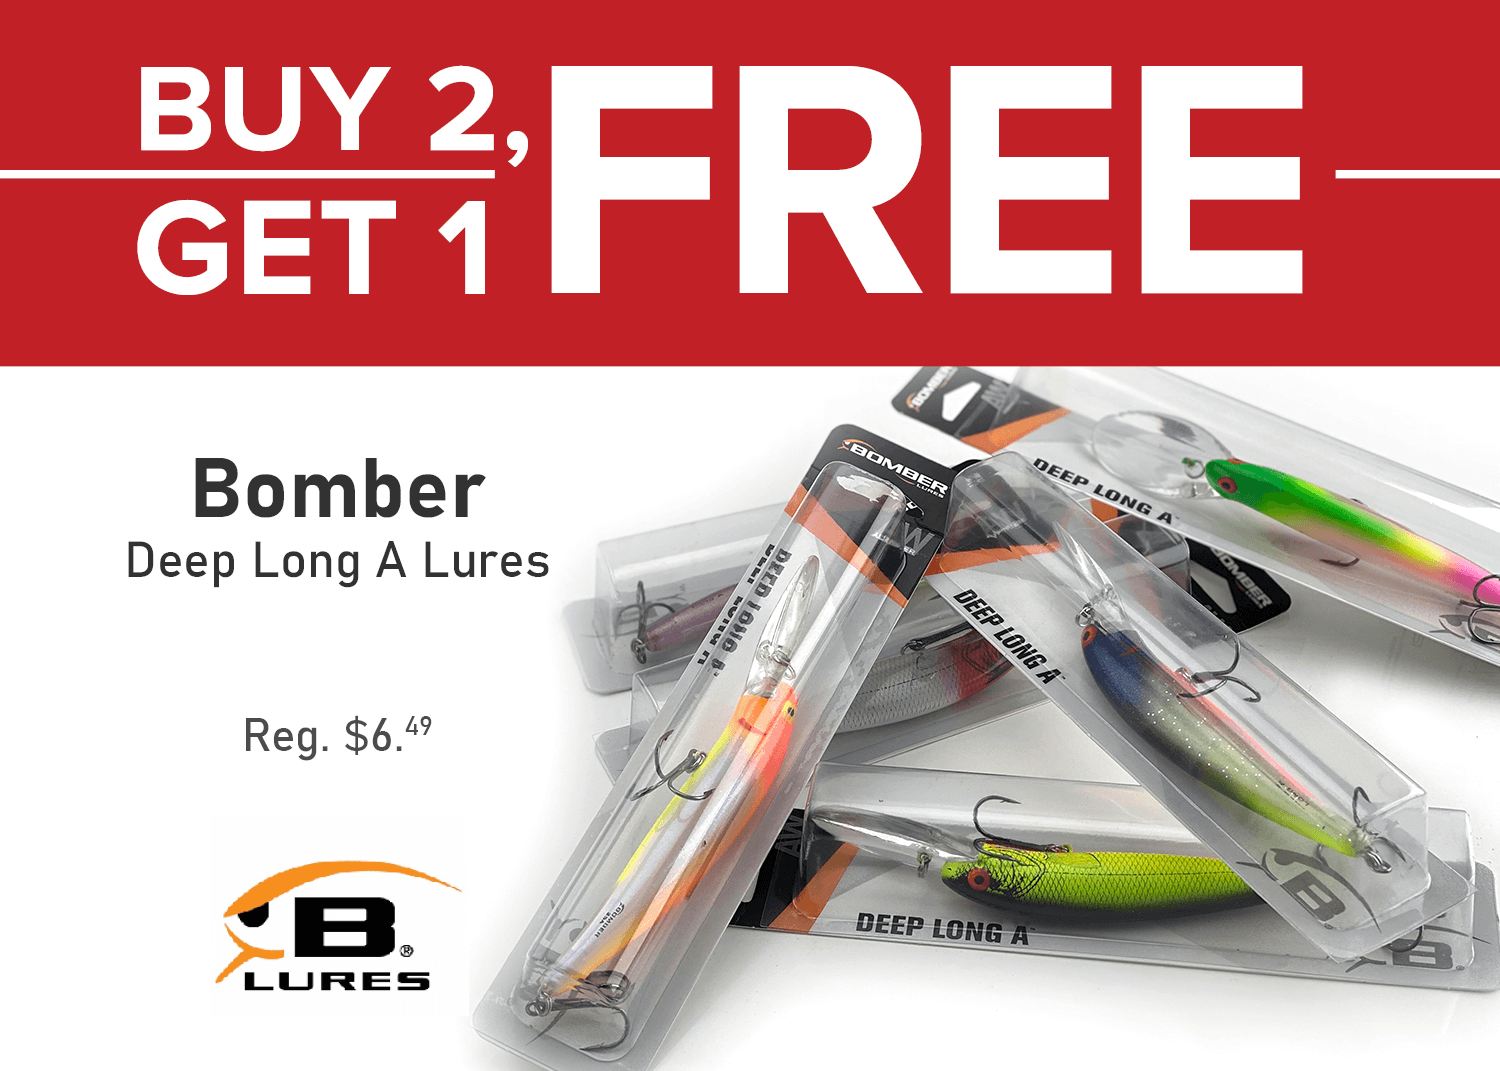 Buy 2, Get 1 FREE on Bomber Deep Long A Lures!